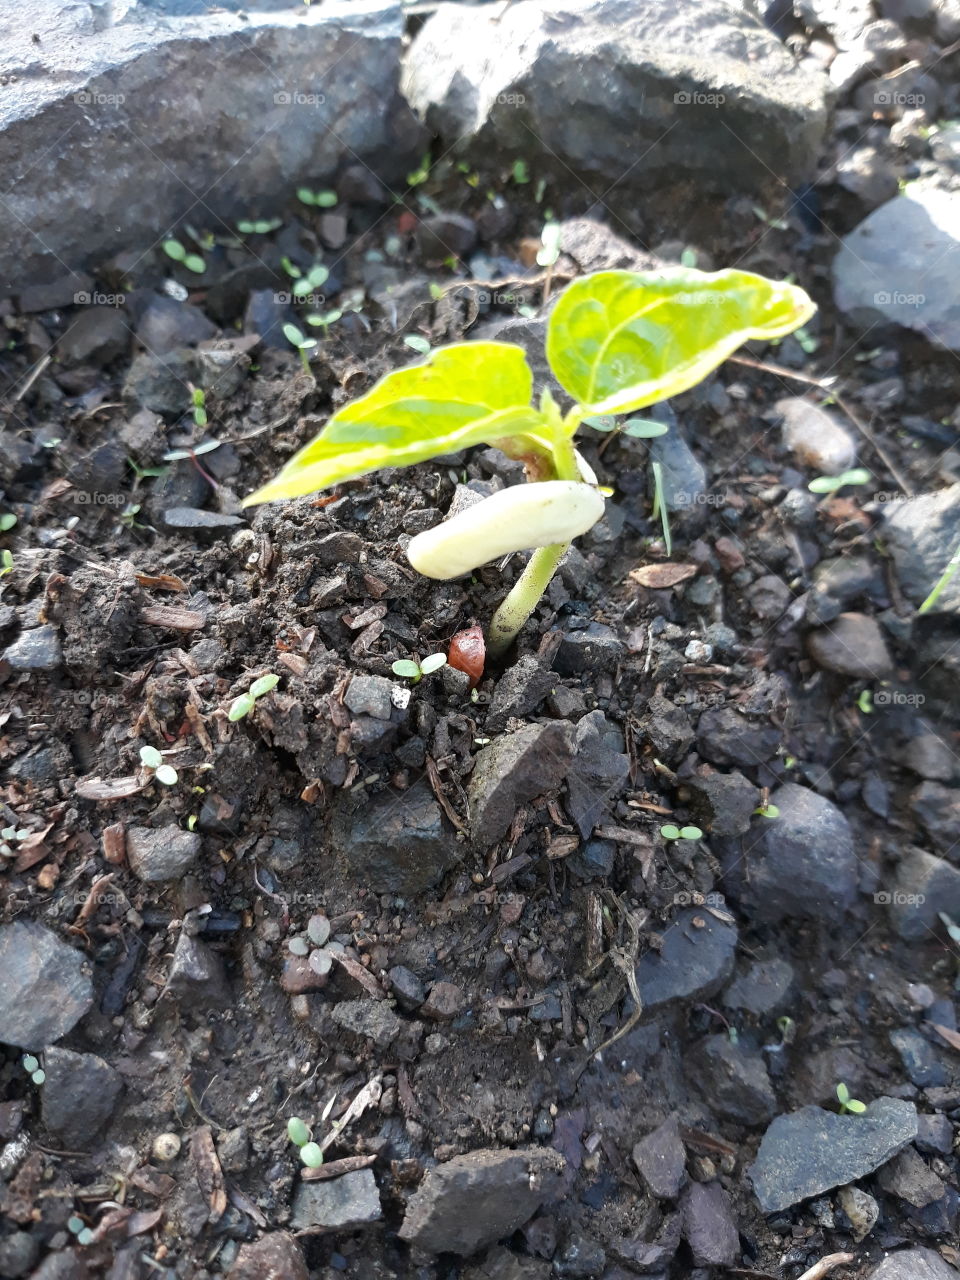 Beans are the easiest to grow, two young leaves in 5 days. They grow well in any soil.